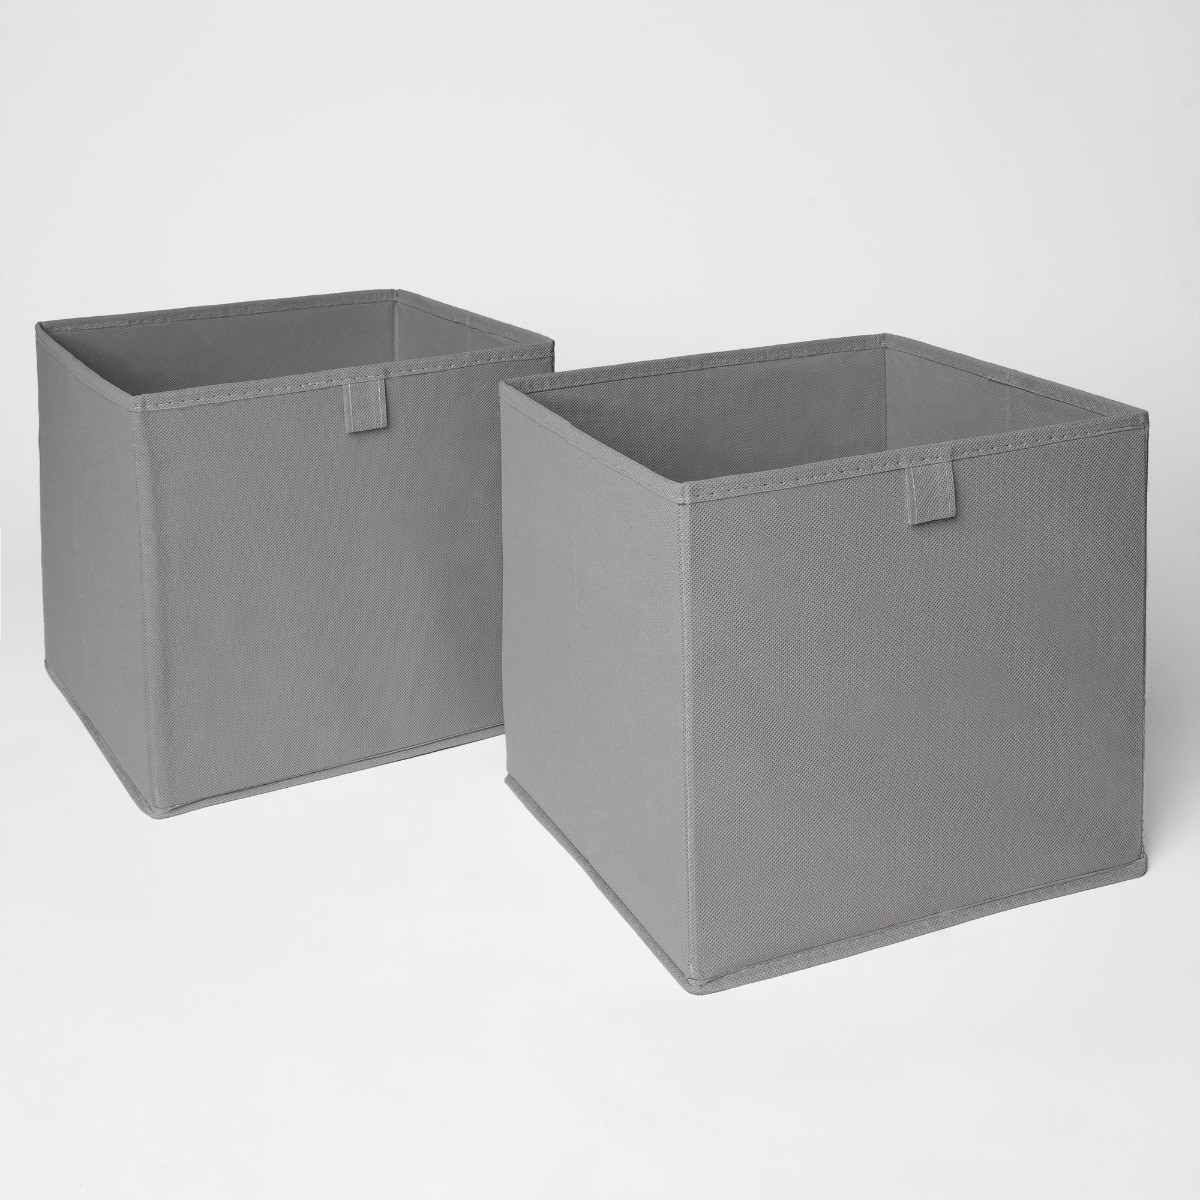 OHS Plain Cube Storage Boxes, Charcoal - 2 Pack>